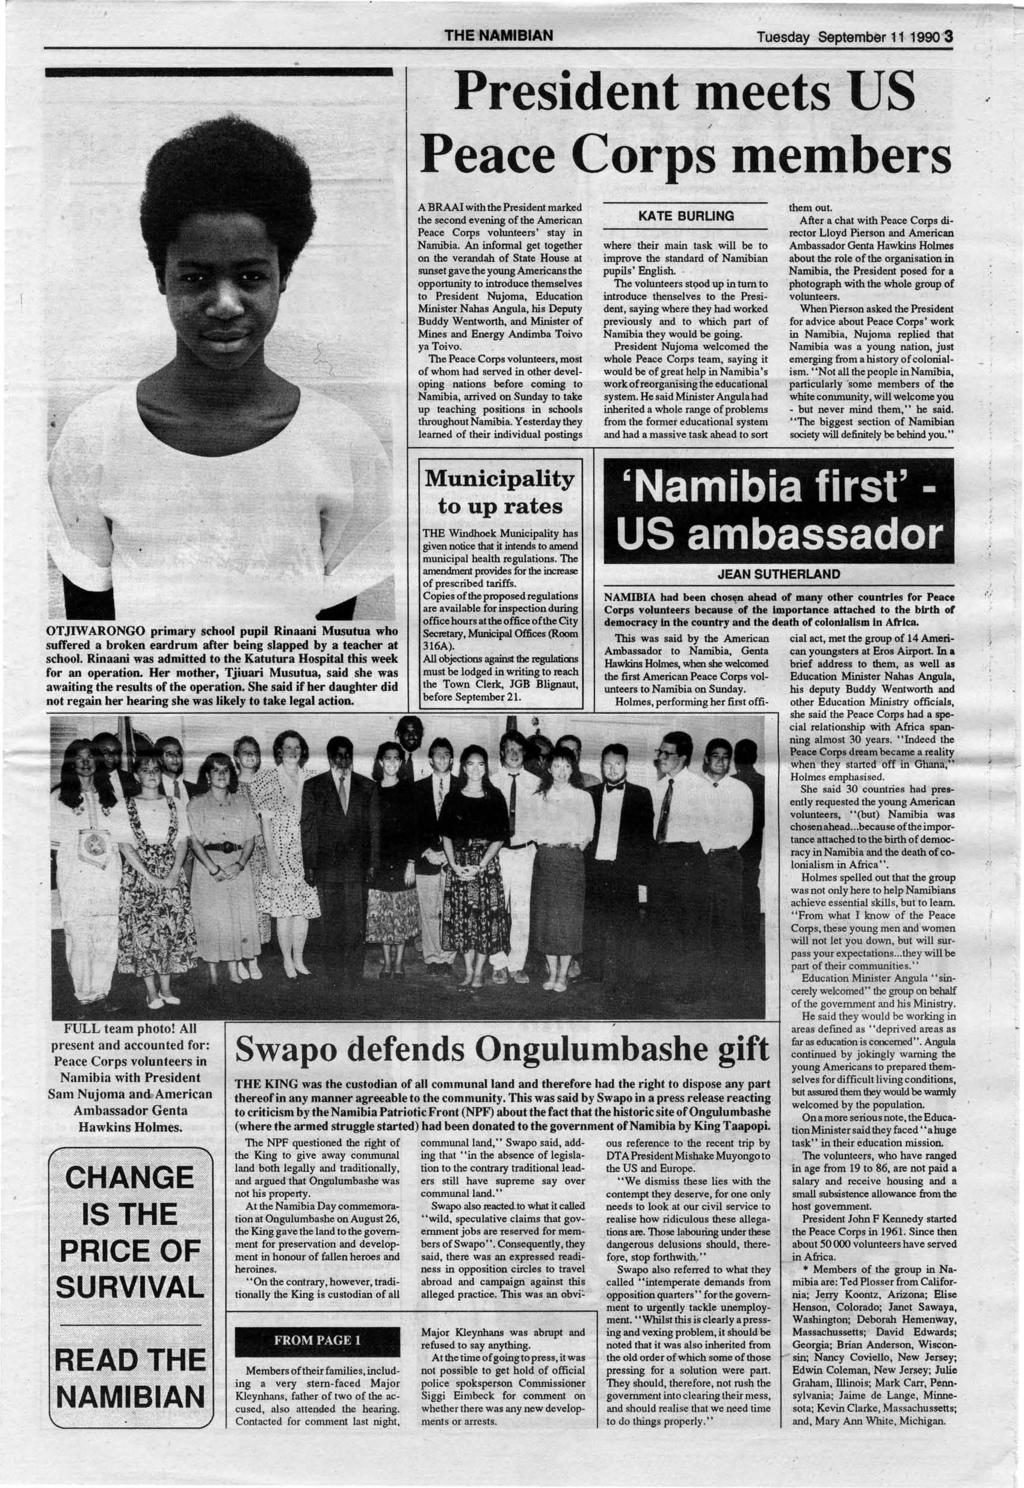 :rhe NAMIBIAN Tuesday Septemb&r ~ 1 1990 '3 President meets US Peace Corps members OTJIWARONGO primary school pupil Rinaani Musutua who suffered a broken eardrum after being slapped by a teacher at